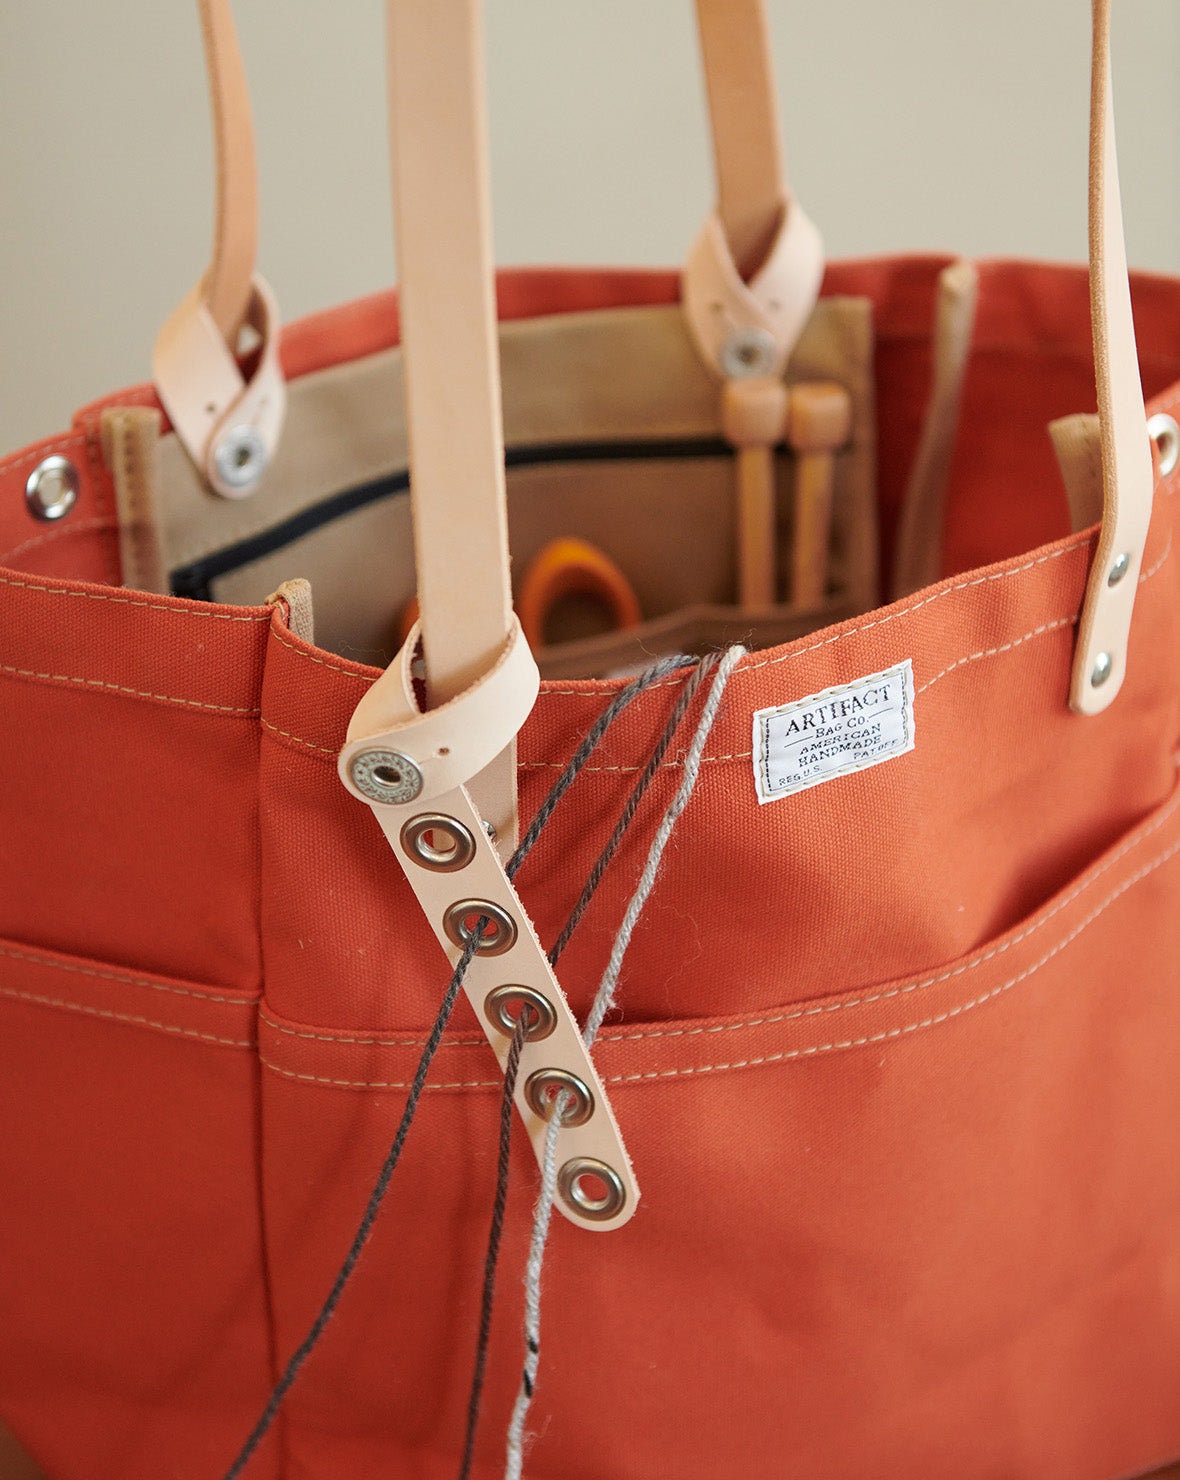 Small batch leather, steel, wool & wood lifestyle accessories